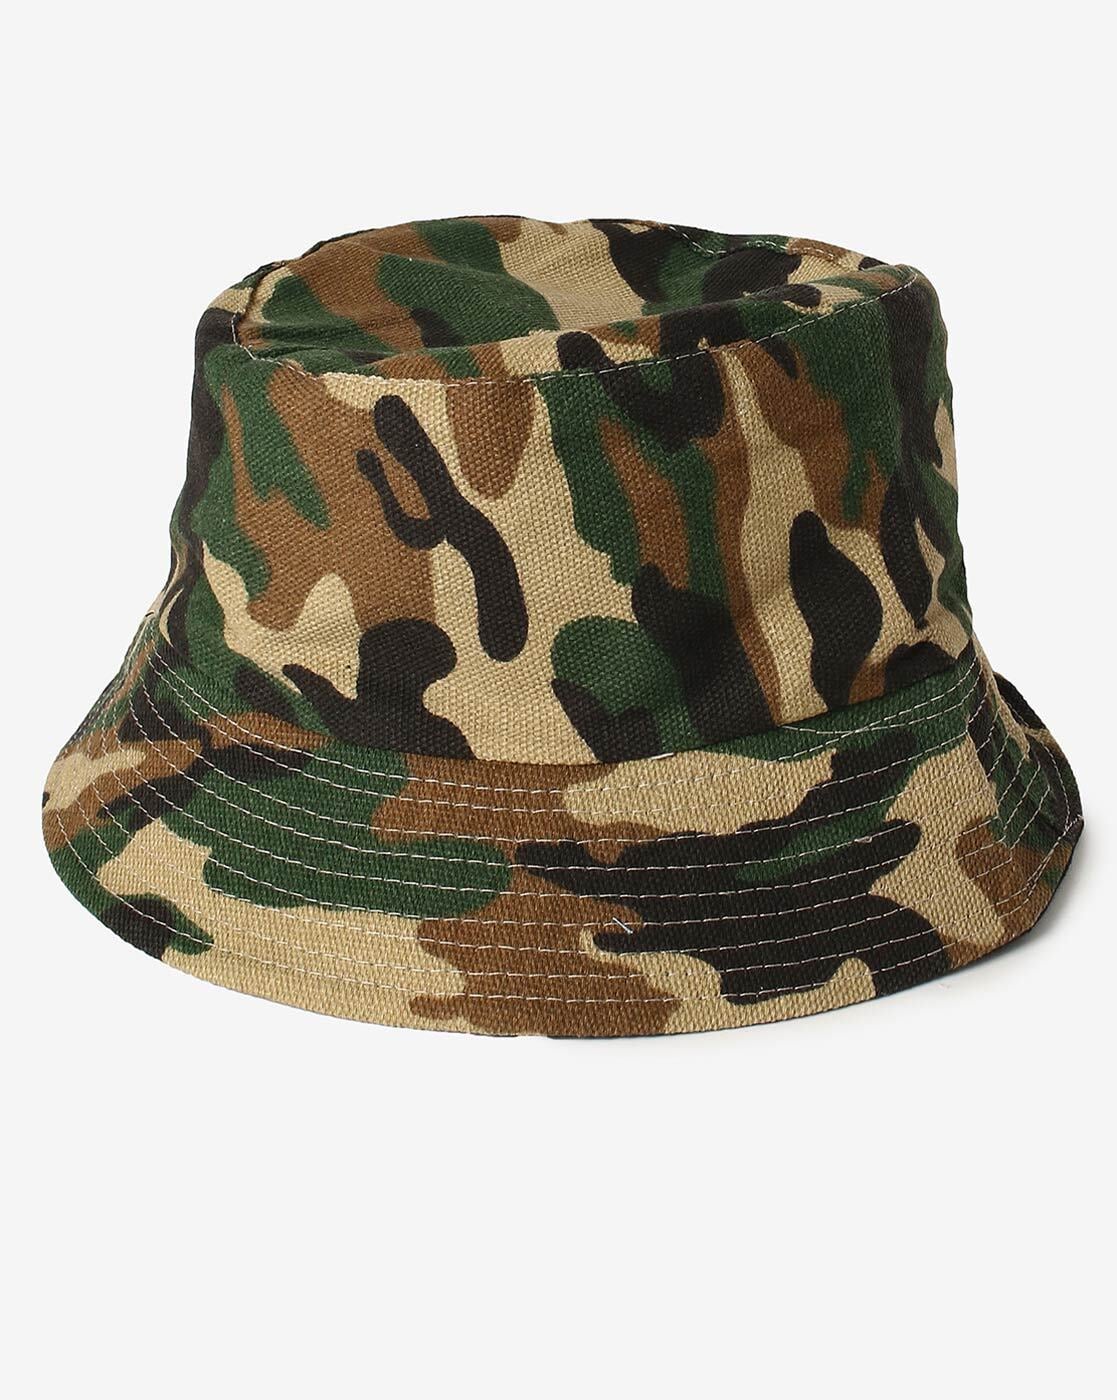 French Accent Camouflage Bucket Hat For Men (Multi, OS)